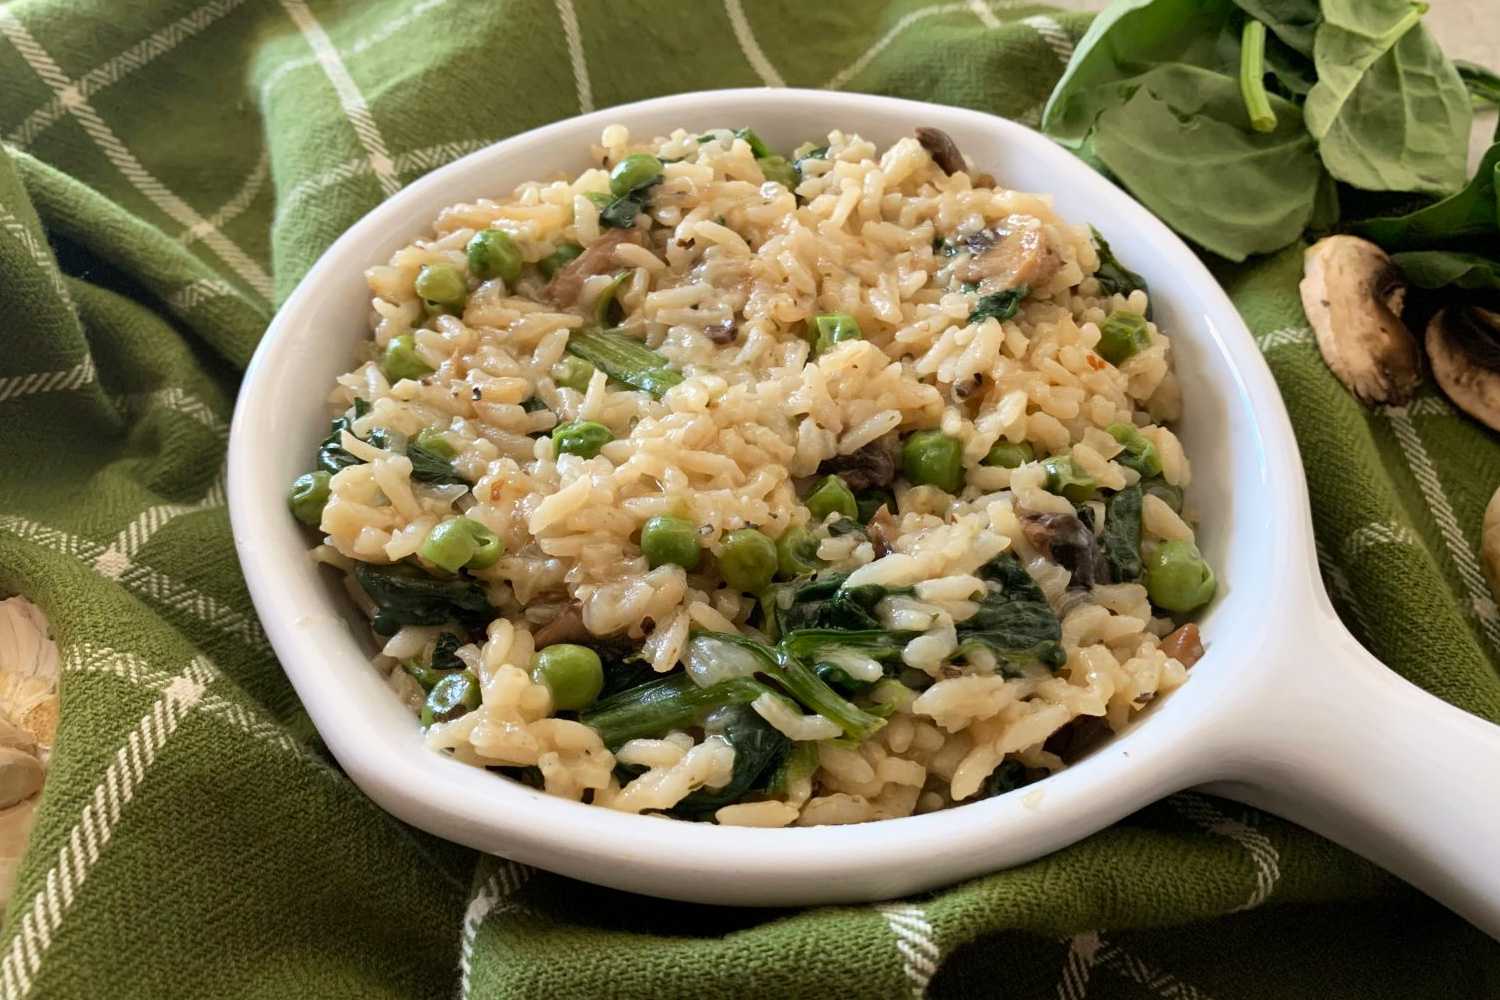 Risotto mixed with peas, sliced ​​mushrooms and spinach in white plate with whole mushrooms and garlic on side